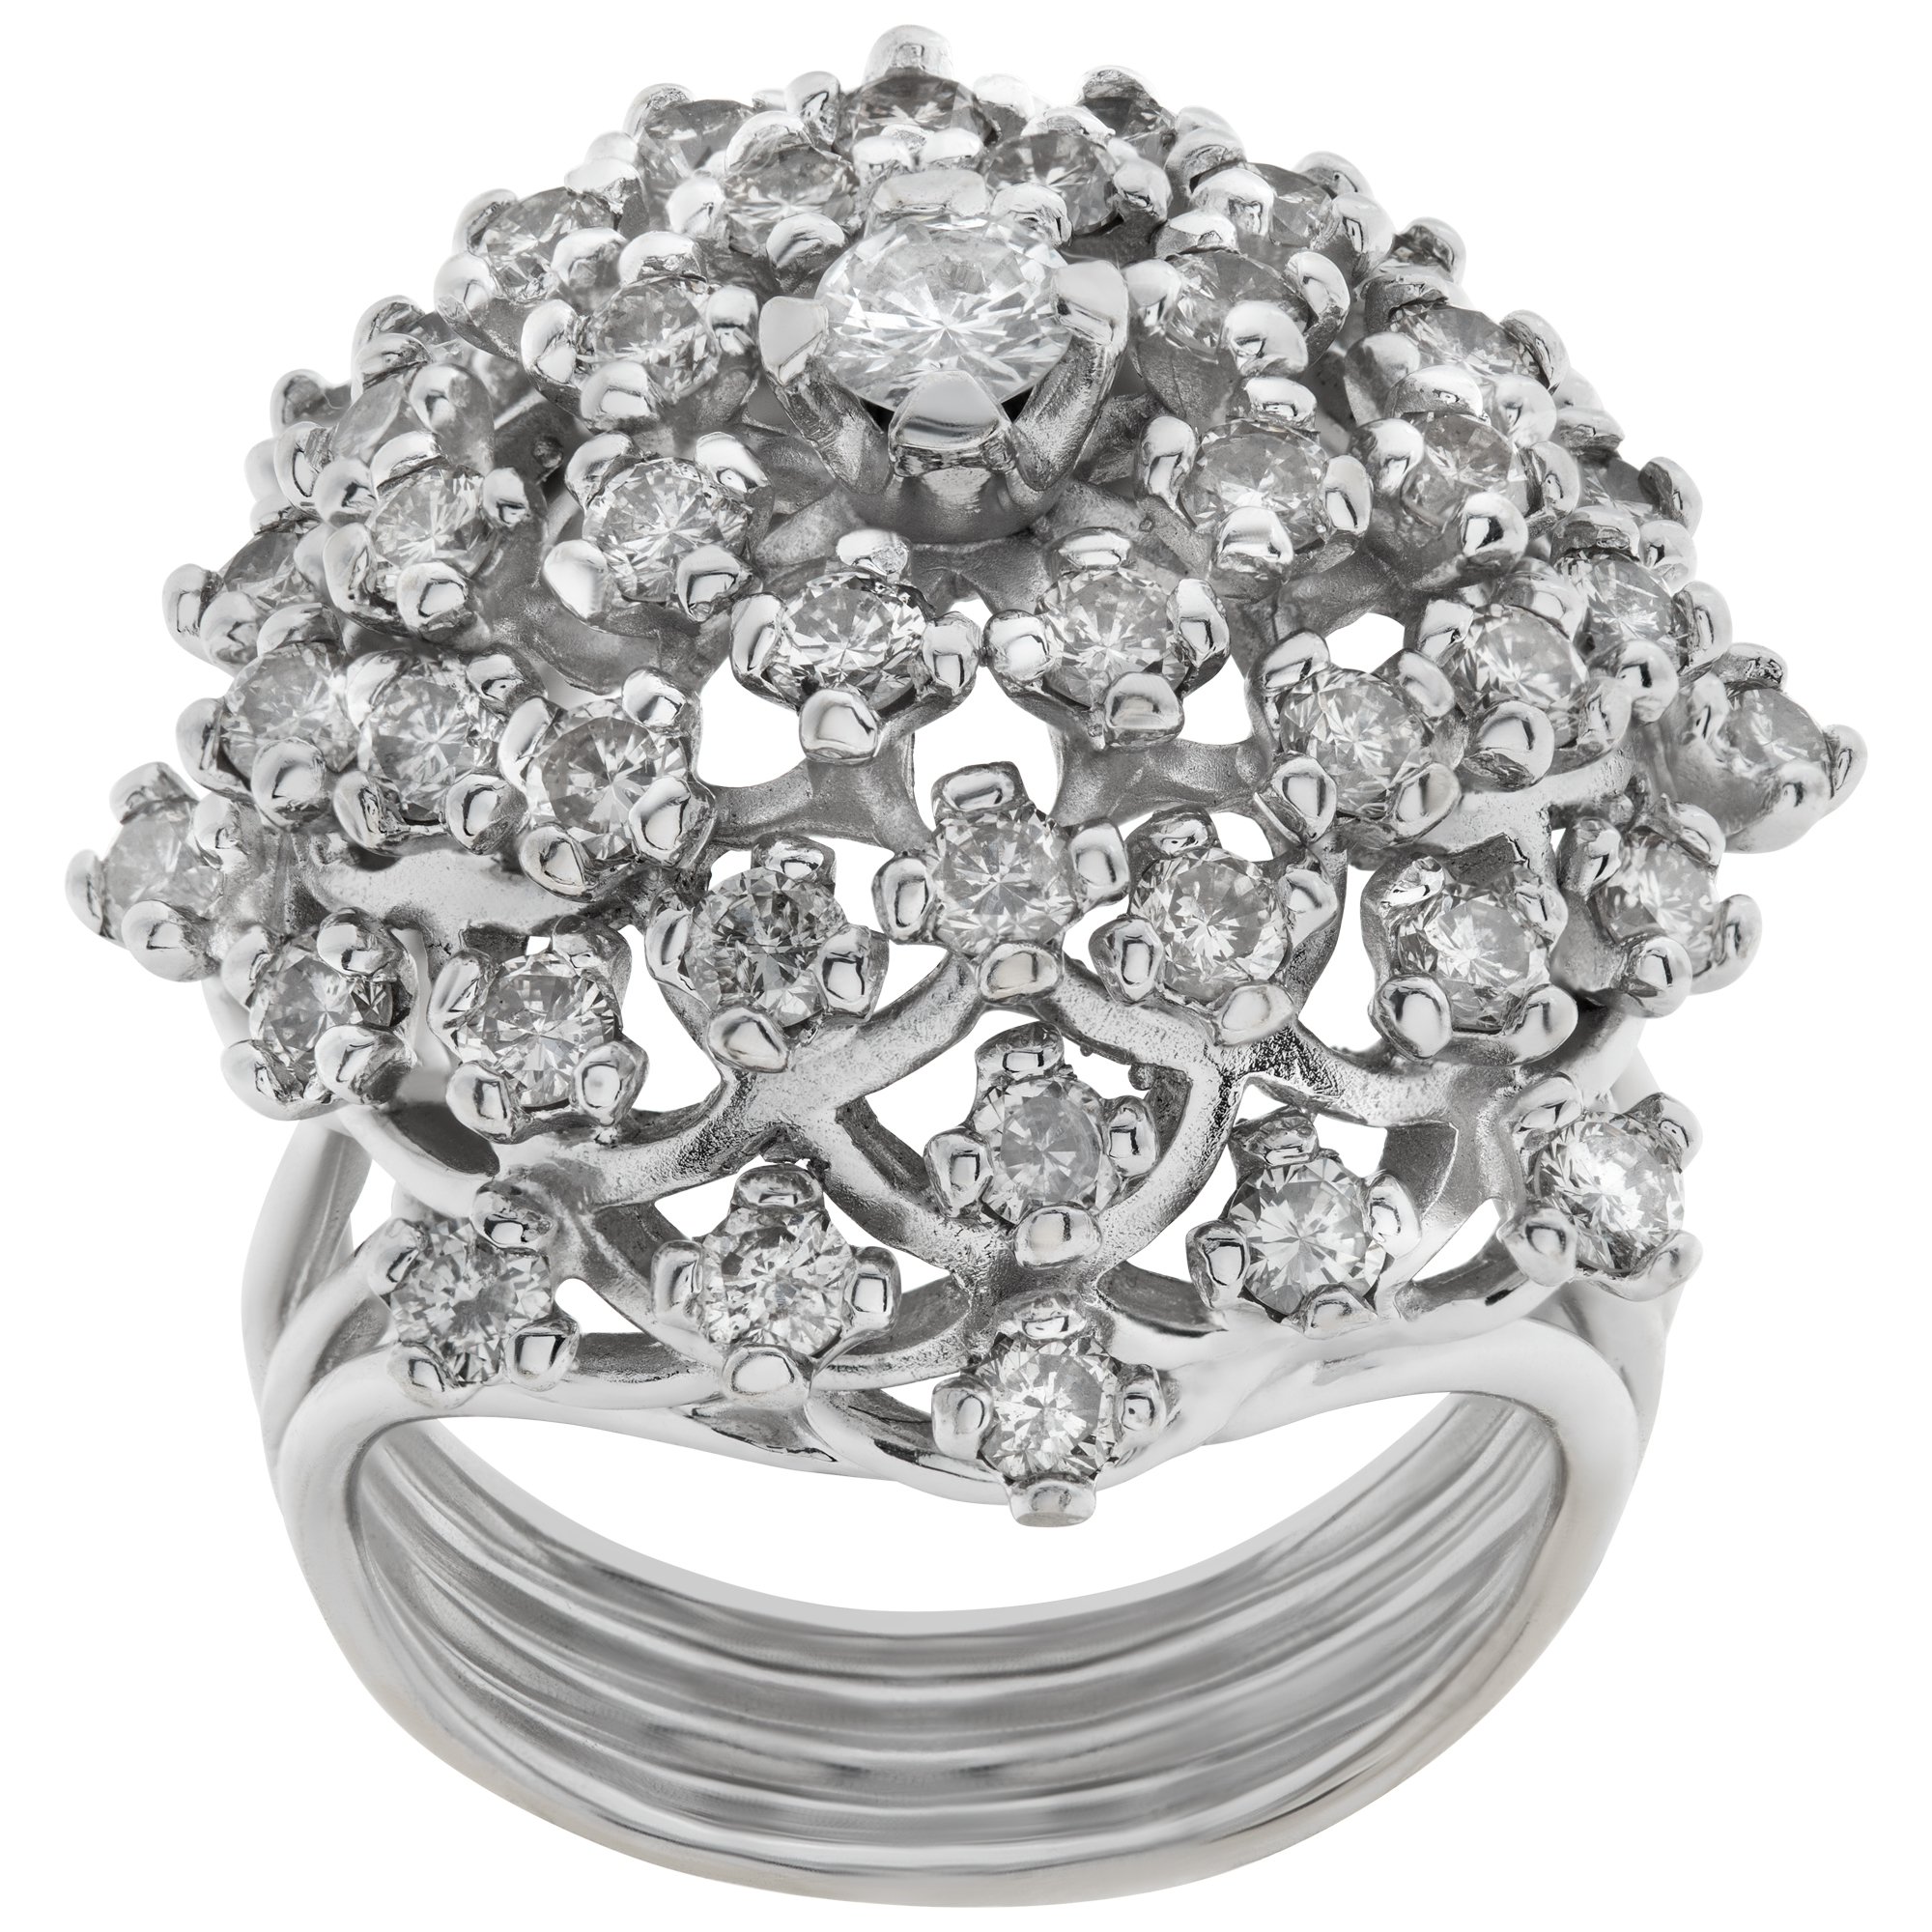 Diamond cluster ring in 18k white gold. 2.00 carats in diamonds. Size 6.5. image 1